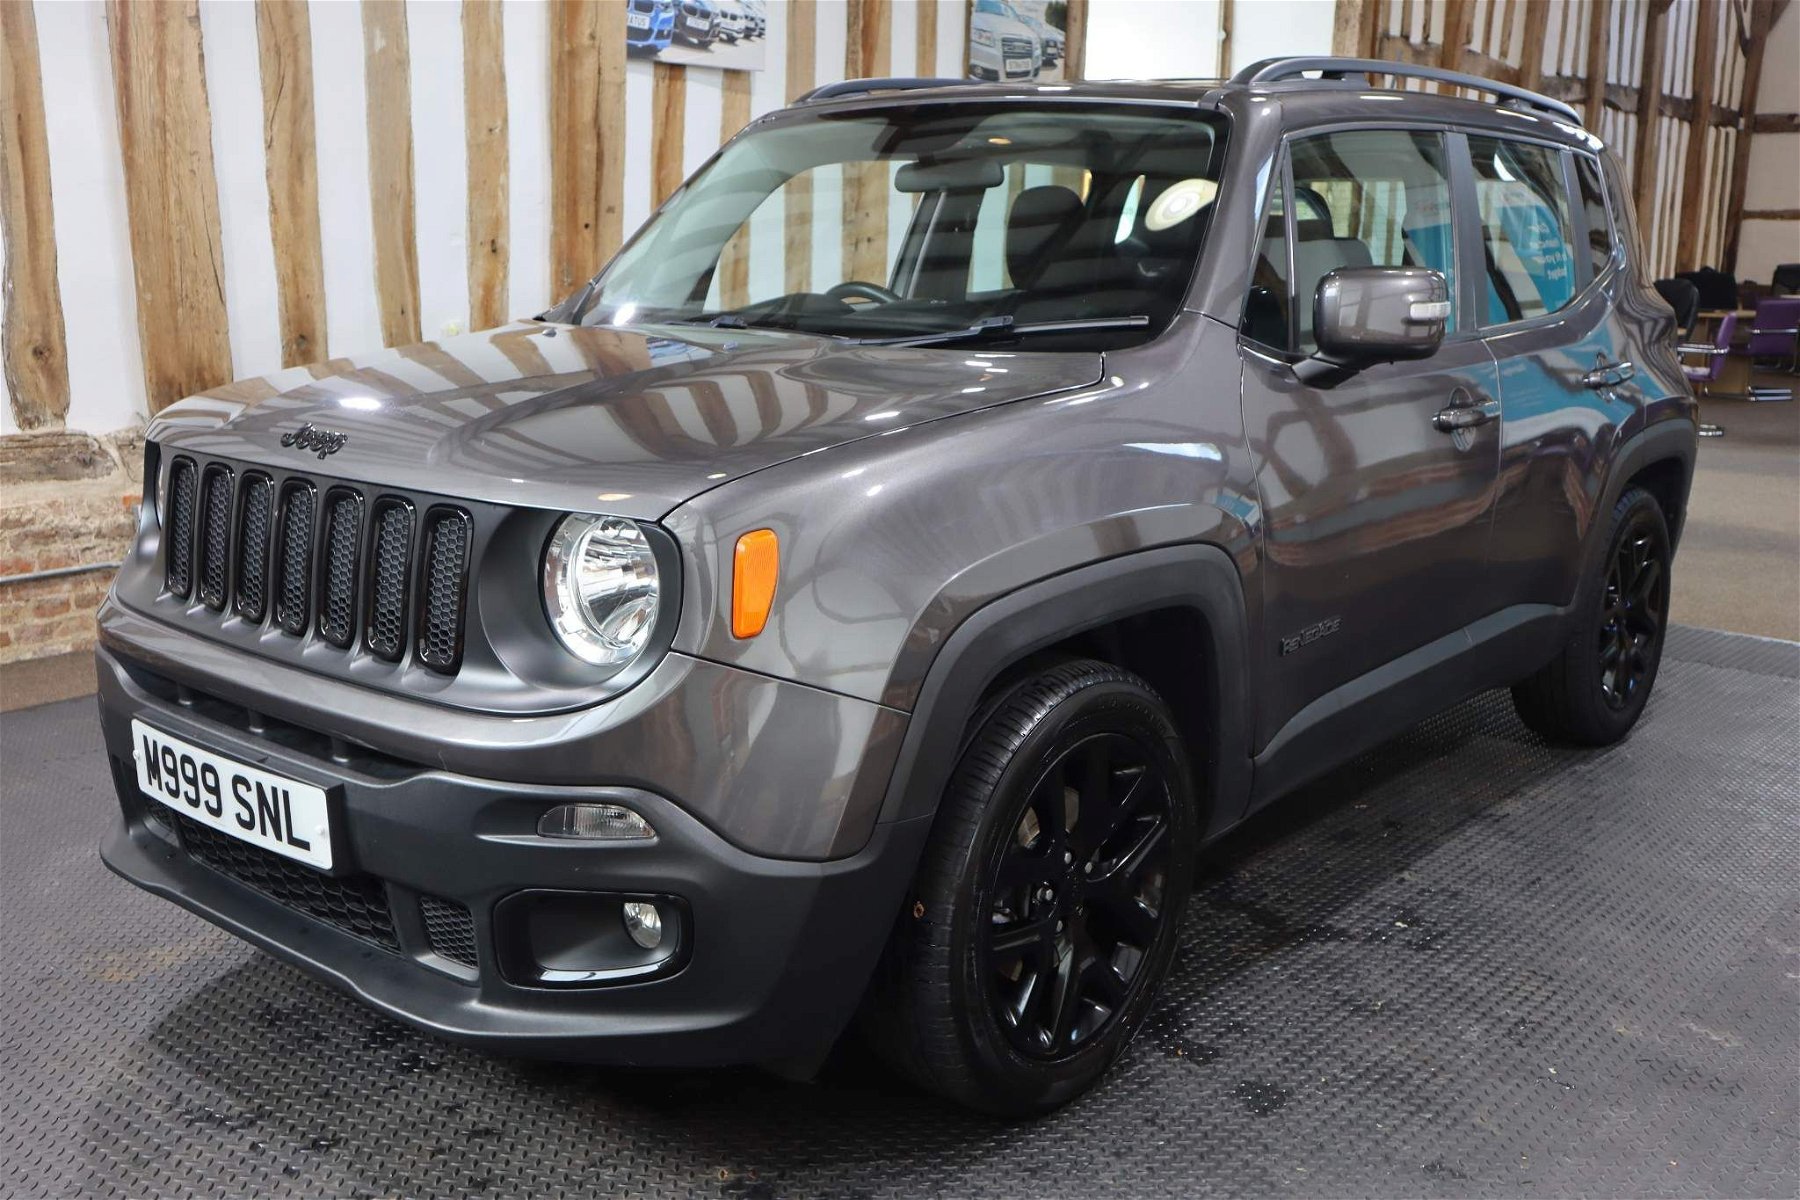 Jeep Renegade for sale in Hook - Part Exchange Welcome